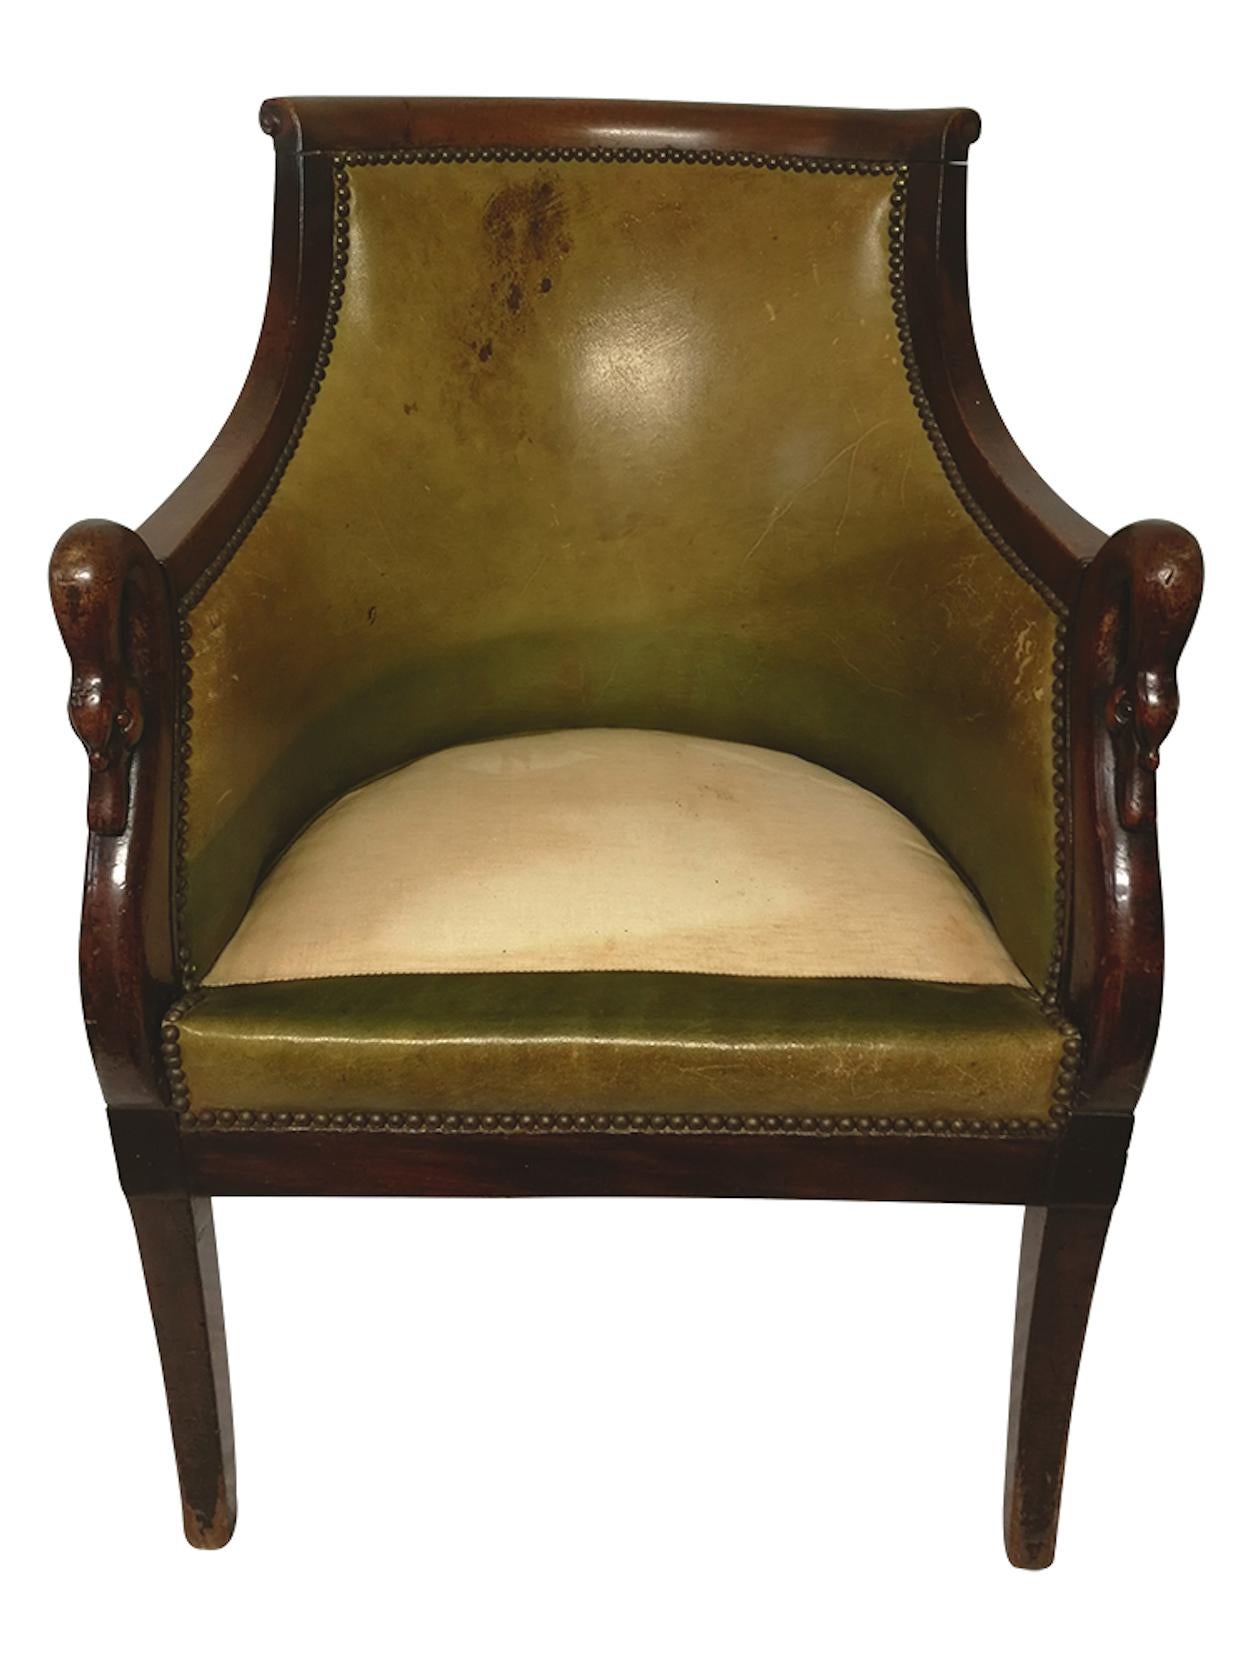 19th Century Khaki Leather Armchair with Carved Swan Armrests For Sale